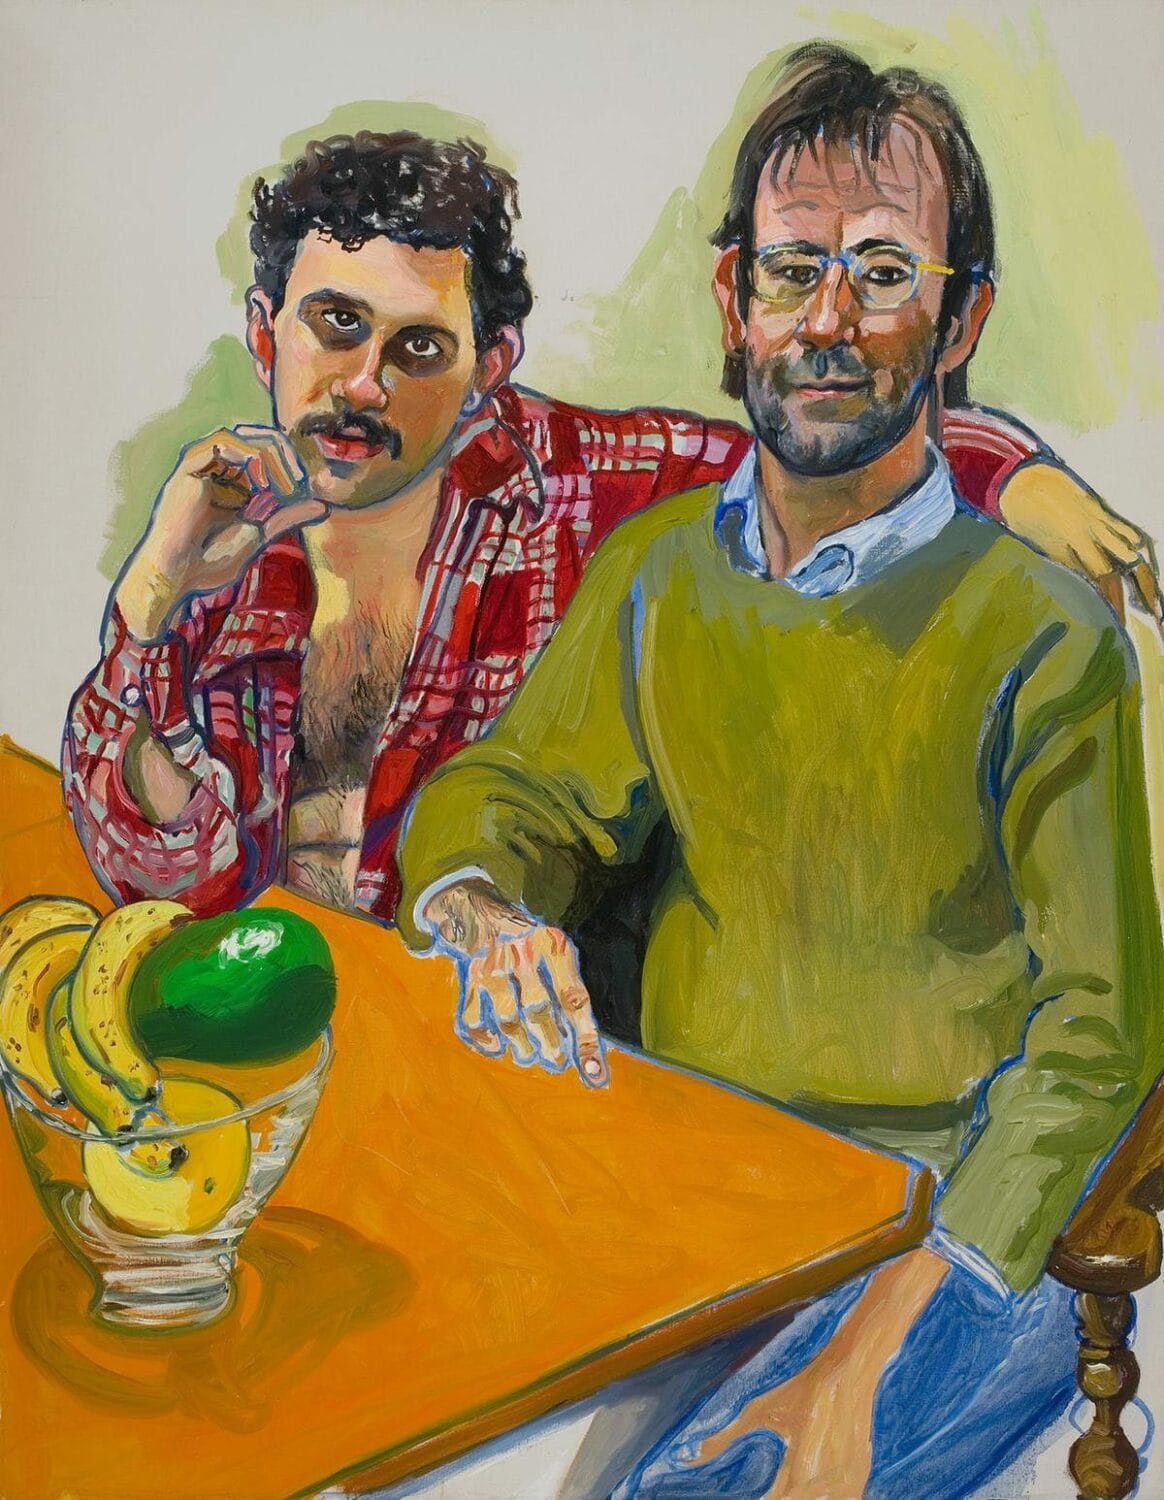 Alice Neel (America, 1900-1984). Geoffrey Hendricks and Brian, 1978. Oil on canvas. San Francisco Museum of Modern Art, Purchase, by exchange, through an anonymous gift. © The Estate of Alice Neel